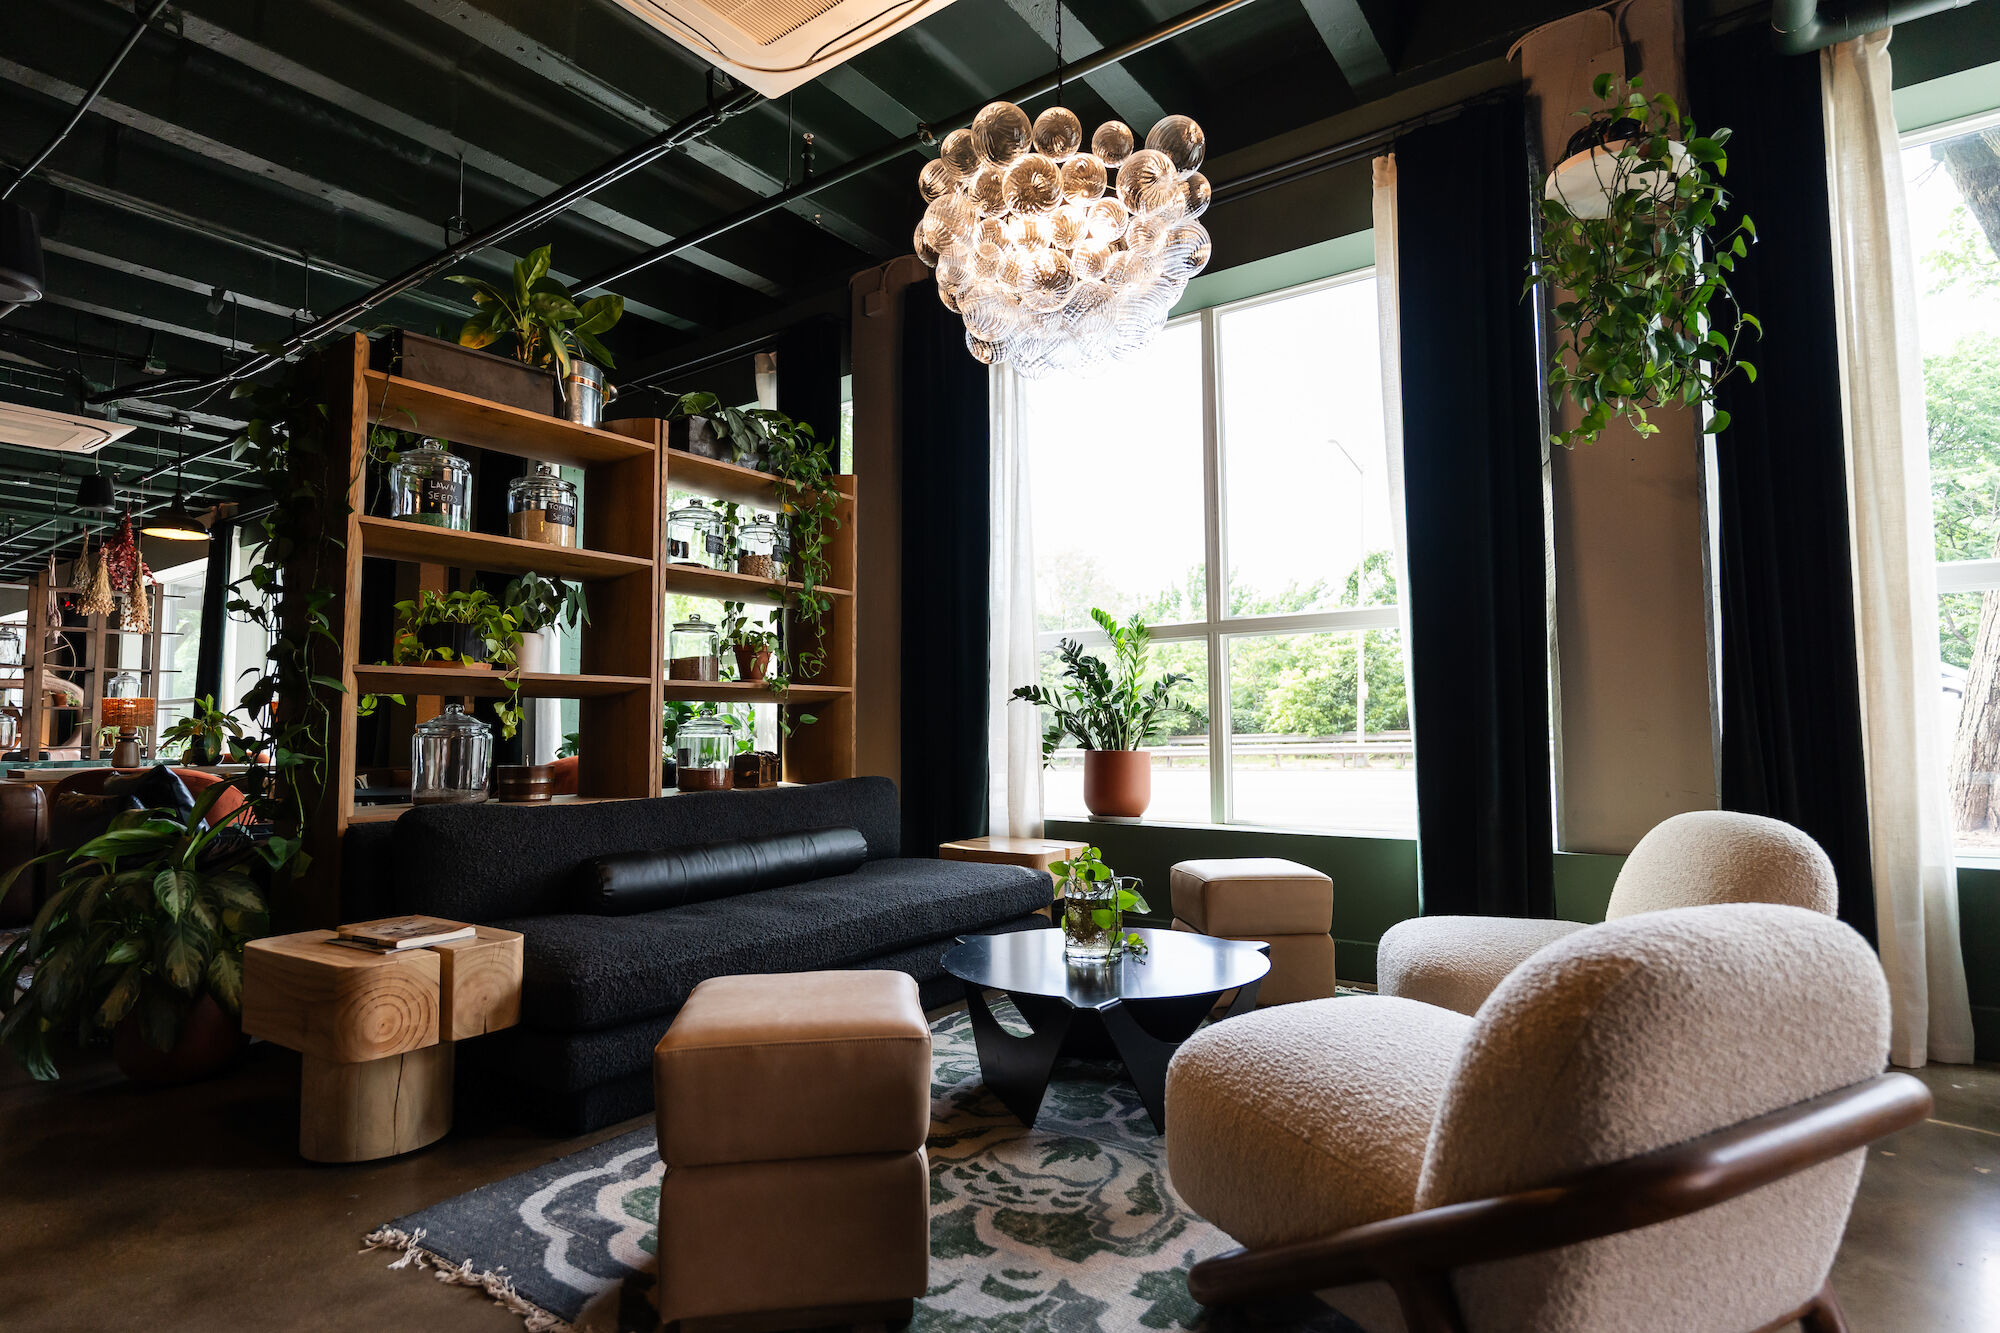 A modern, cozy living room with a black sofa, armchairs, a chandelier, plants, and large windows. There is shelving with decor near the seating area.